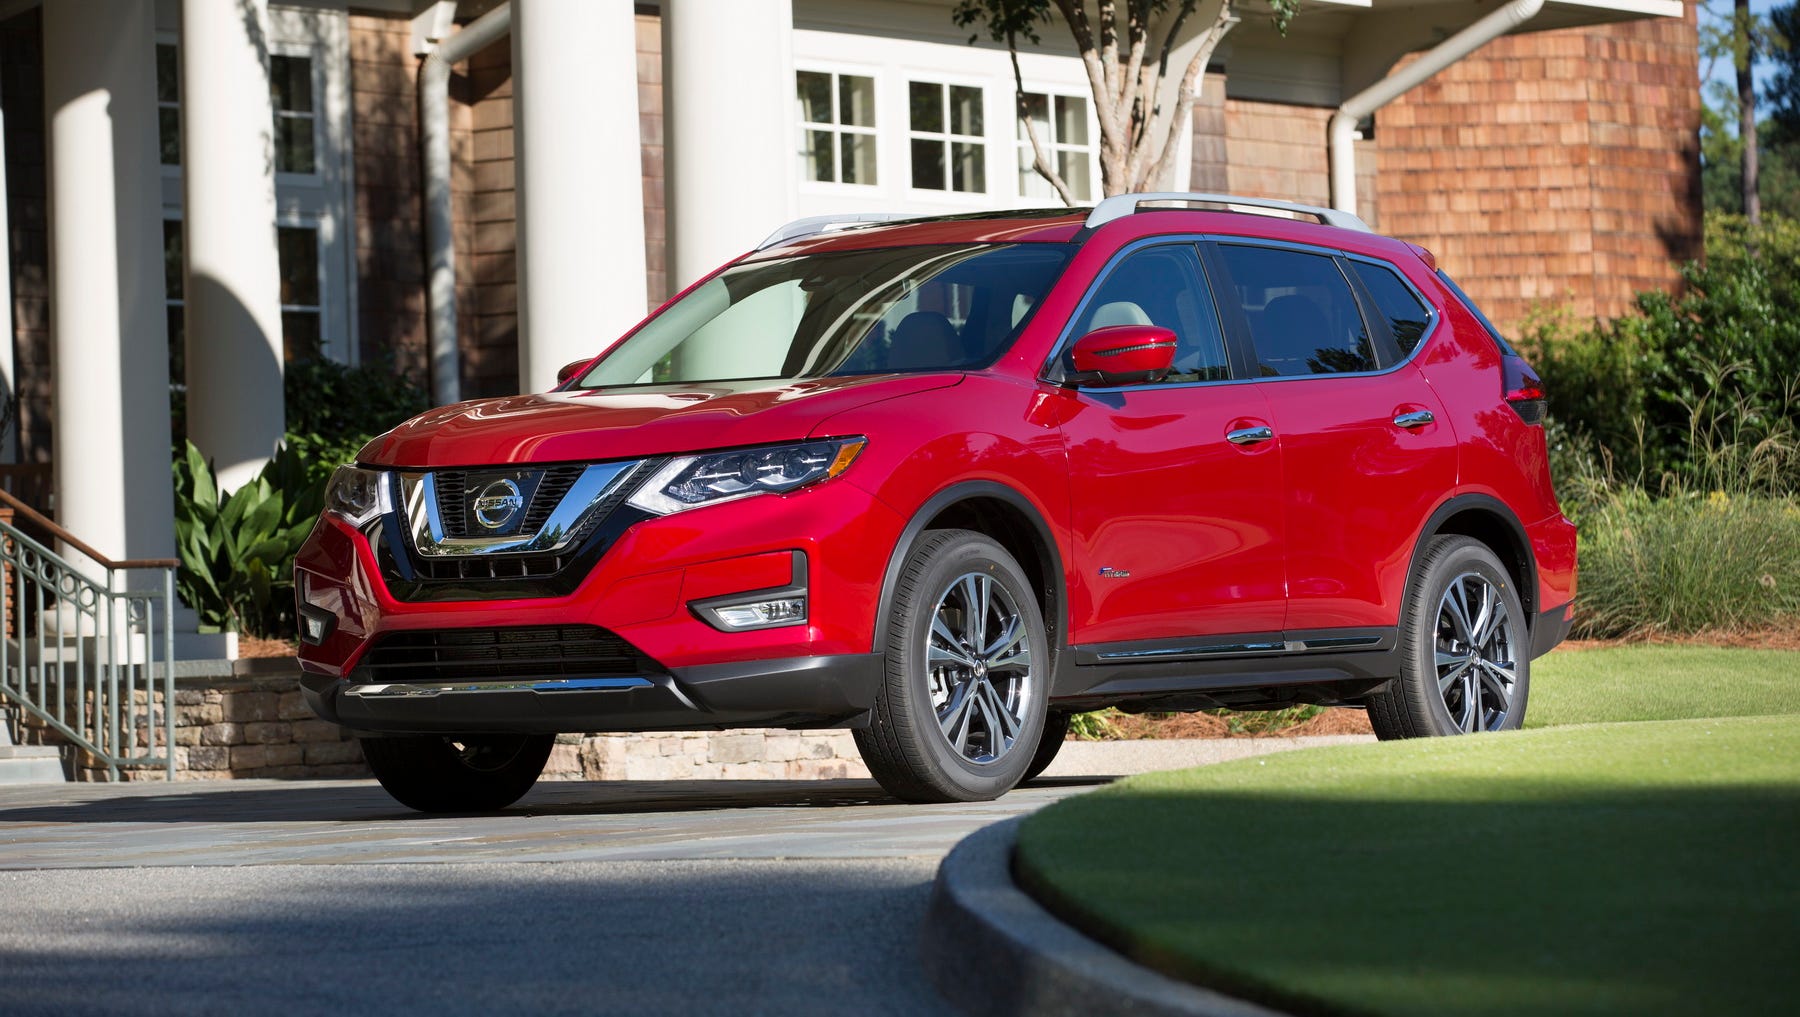 2017 Nissan Rogue hybrid crossover breaks new ground